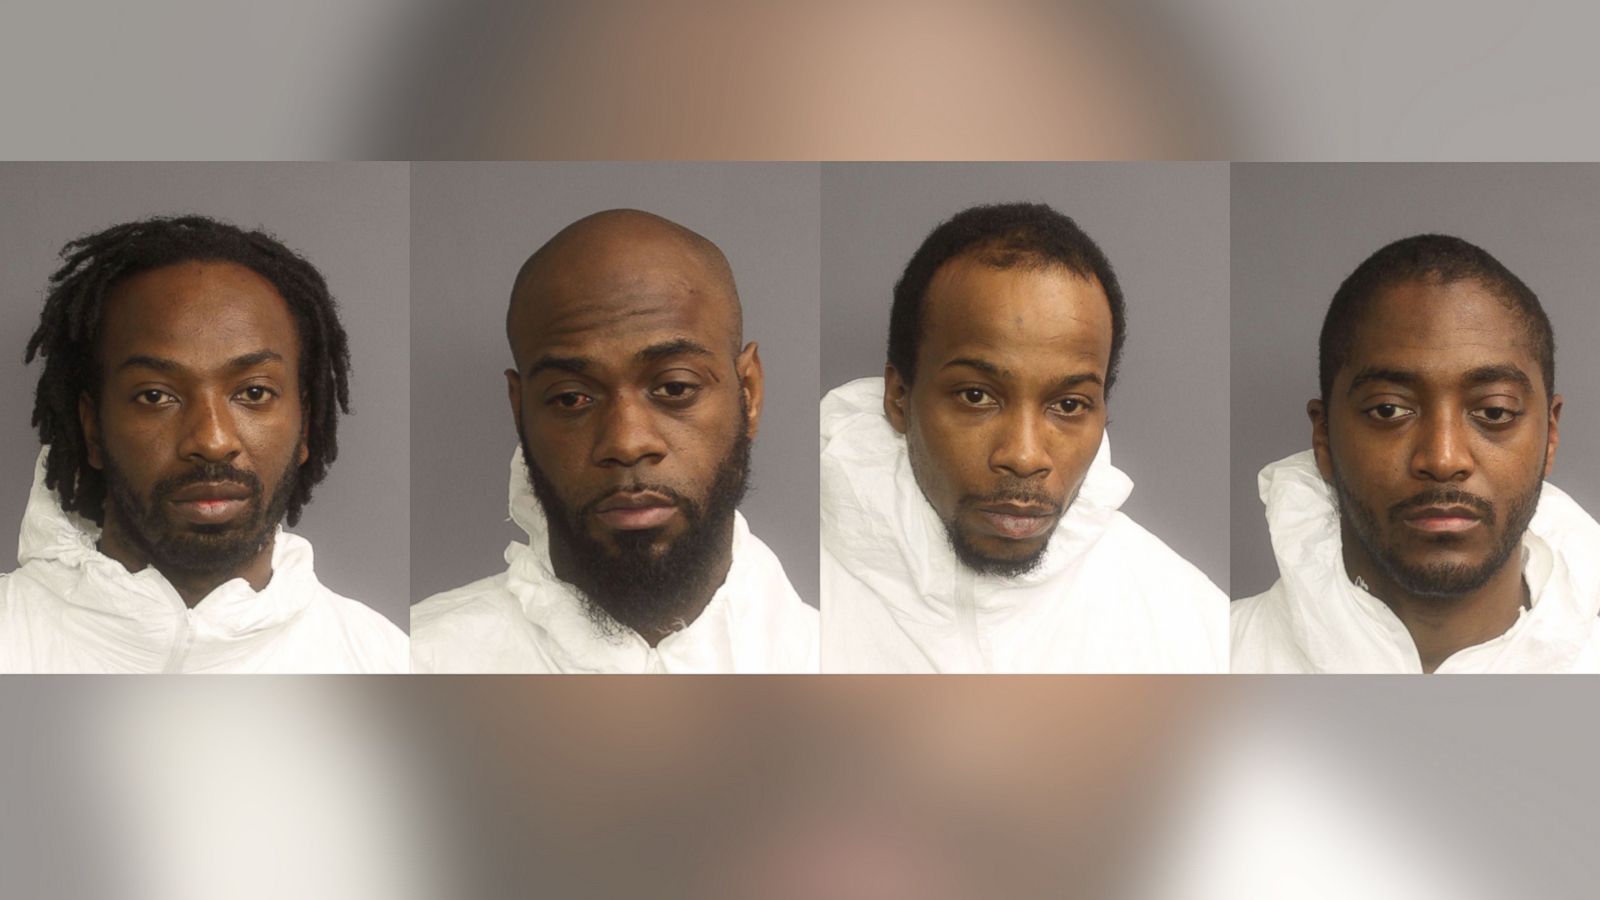 4 arrested in deadly N.J. mall carjacking